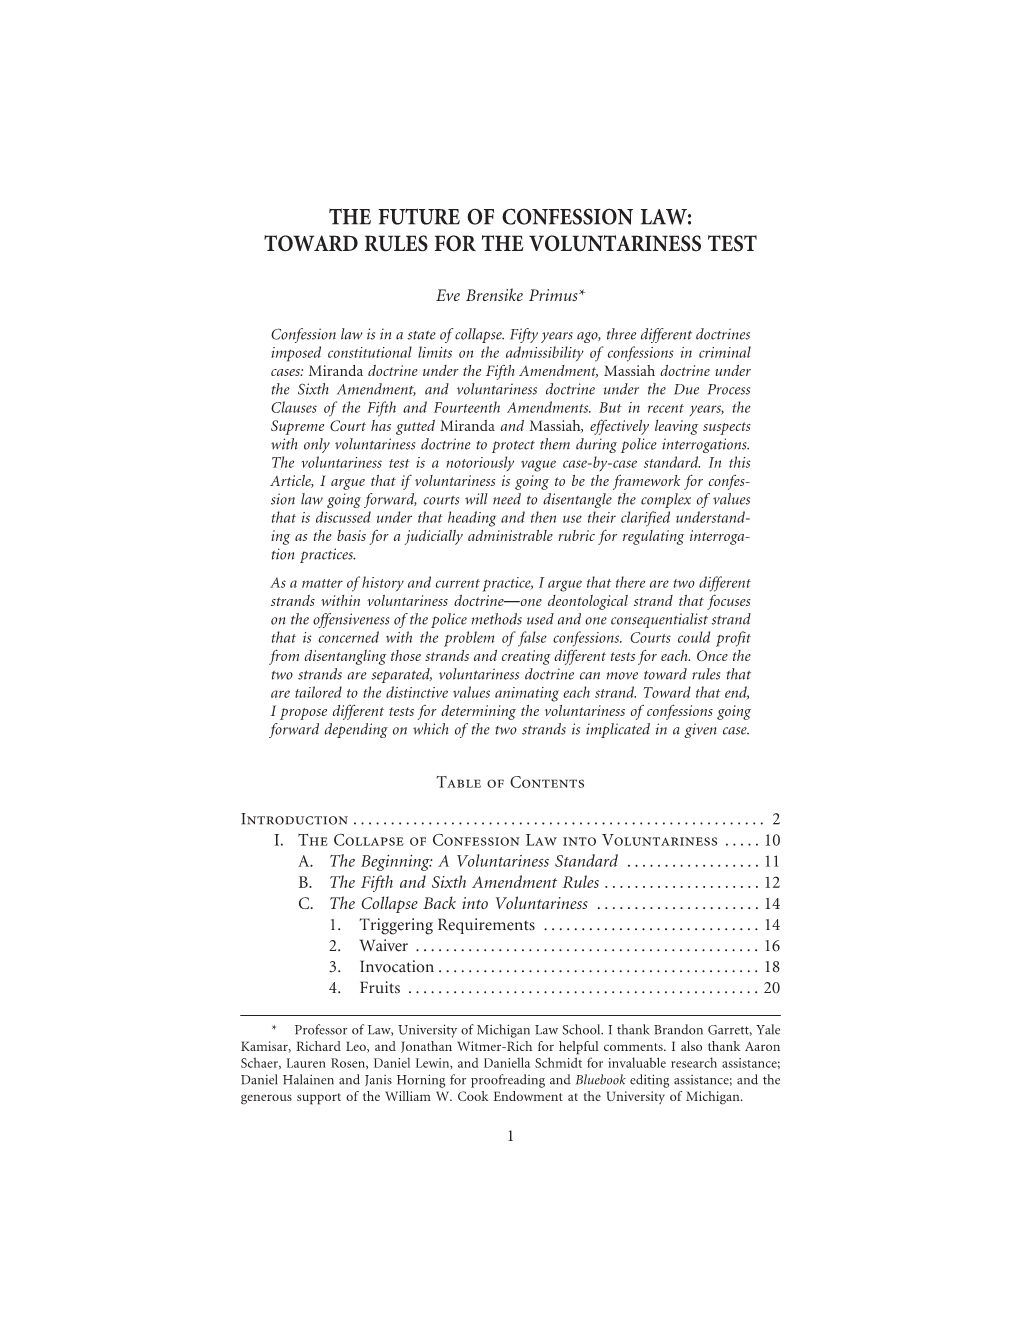 The Future of Confession Law: Toward Rules for the Voluntariness Test